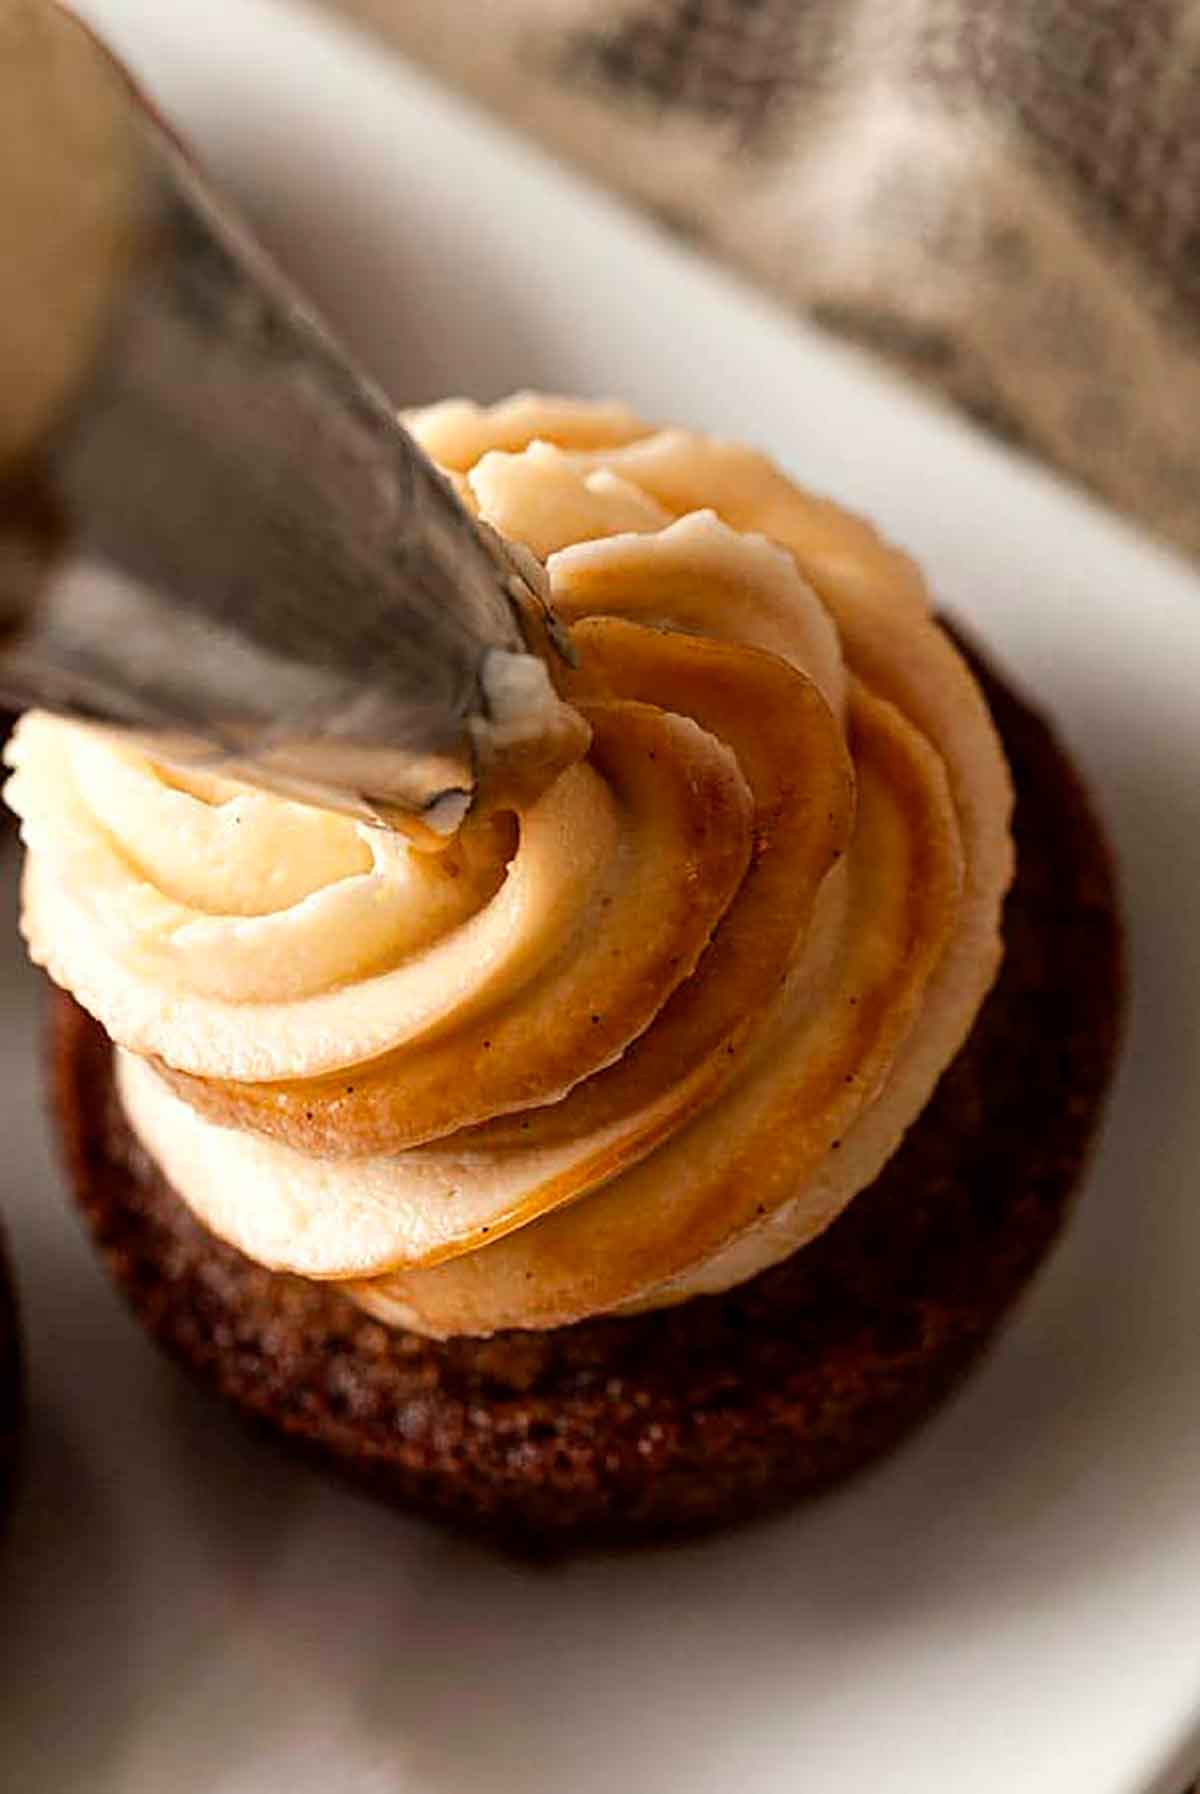 A cupcake being frosted with a pastry tip.